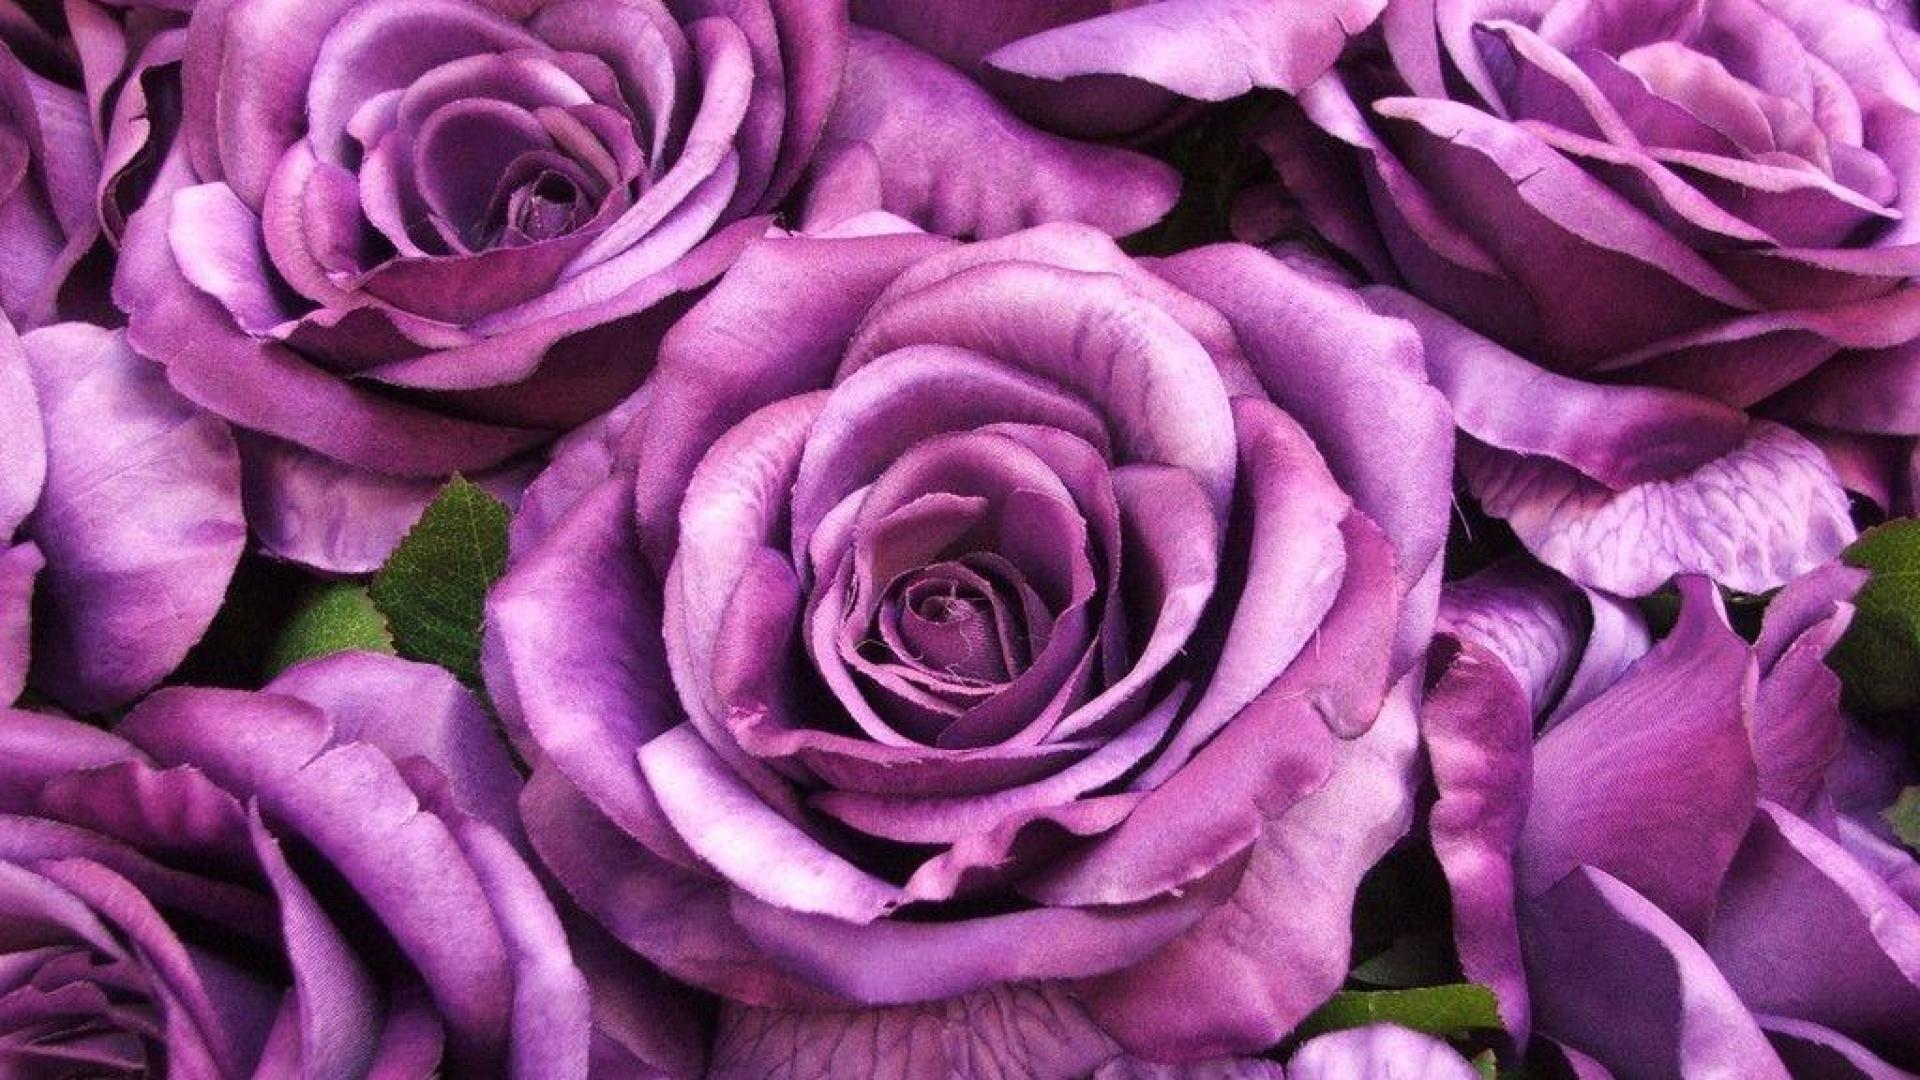 Big purple roses wallpapers and images - wallpapers ...